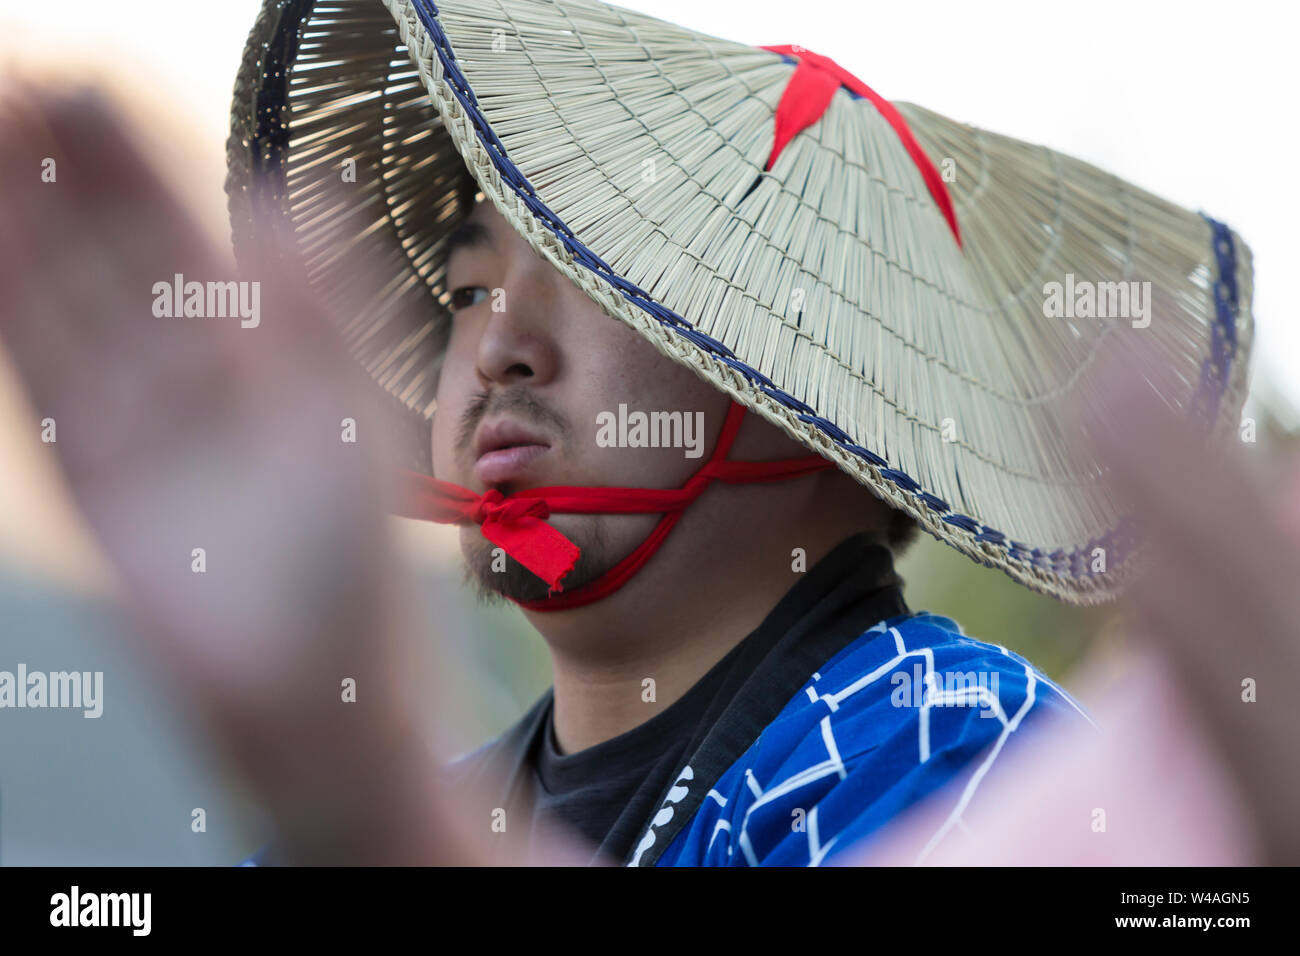 A young man wears a traditional amigasa hat during a Bon dance at the 87th annual Bon Odori Festival in Seattle, Washington on July 20, 2019. The lively summer festival features traditional music and folk dance to welcome the spirits of the dead and celebrate the lives of ancestors. Stock Photo